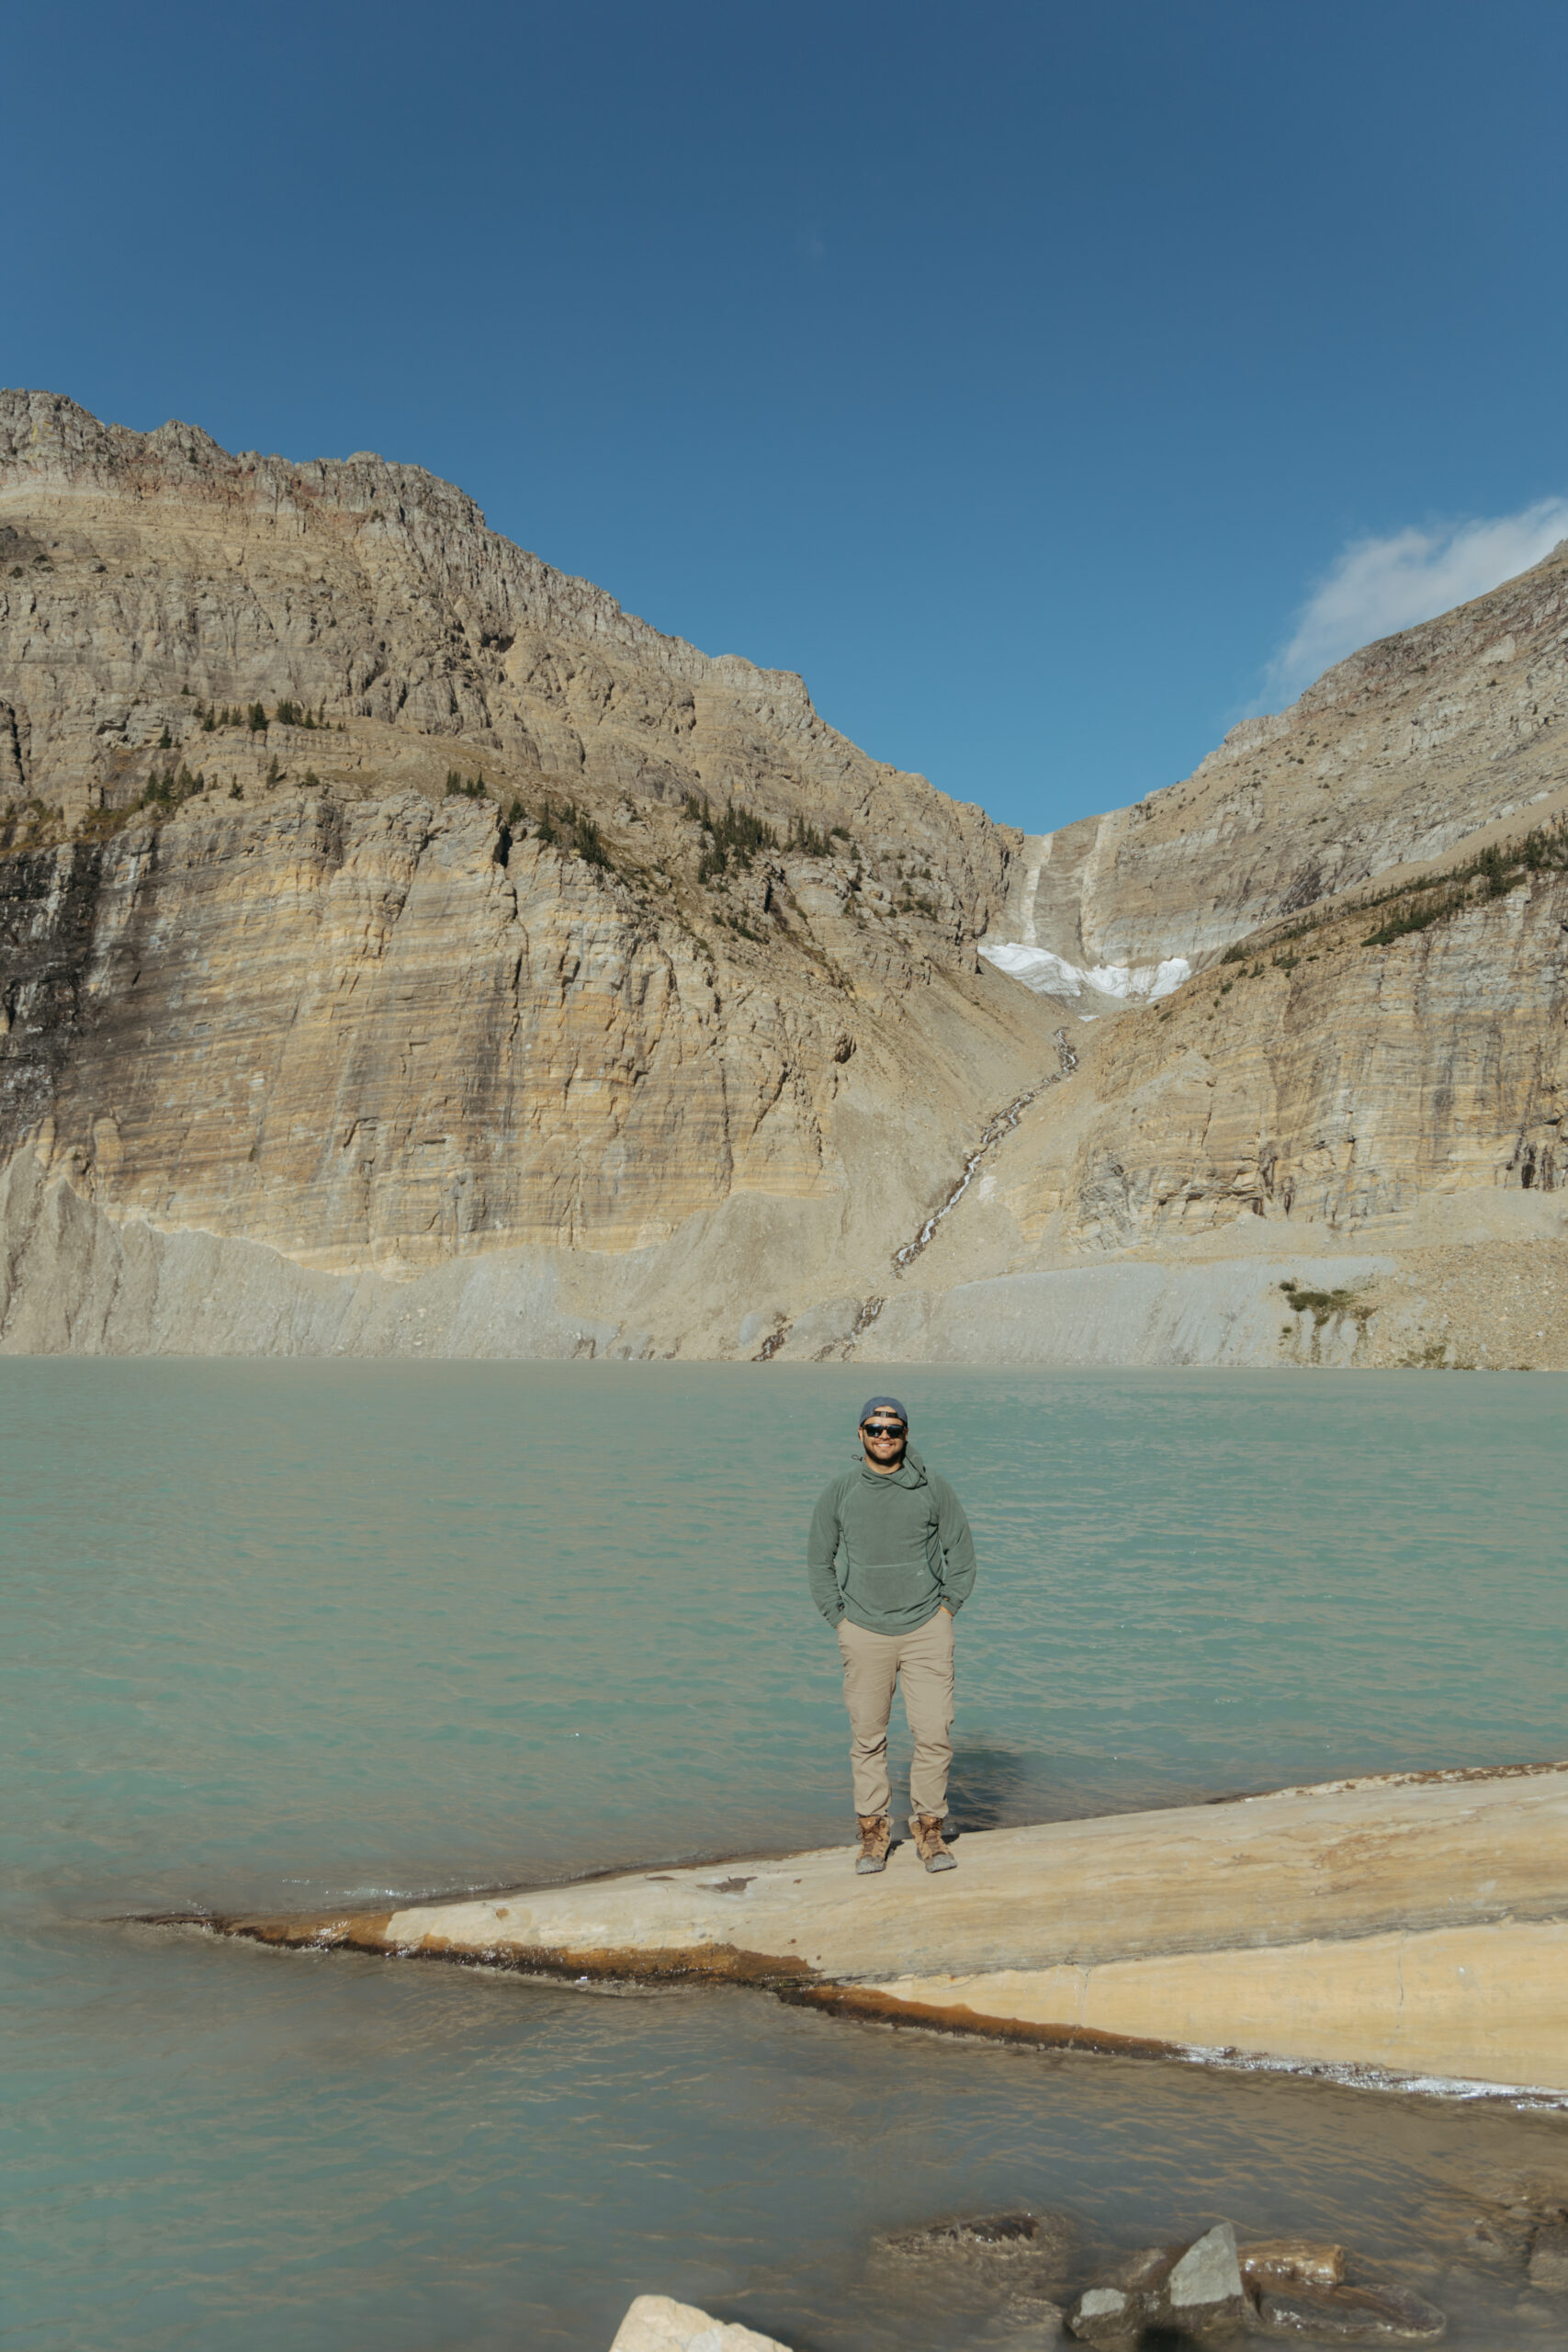 grinnell glacier one of the best hikes in glacier national park